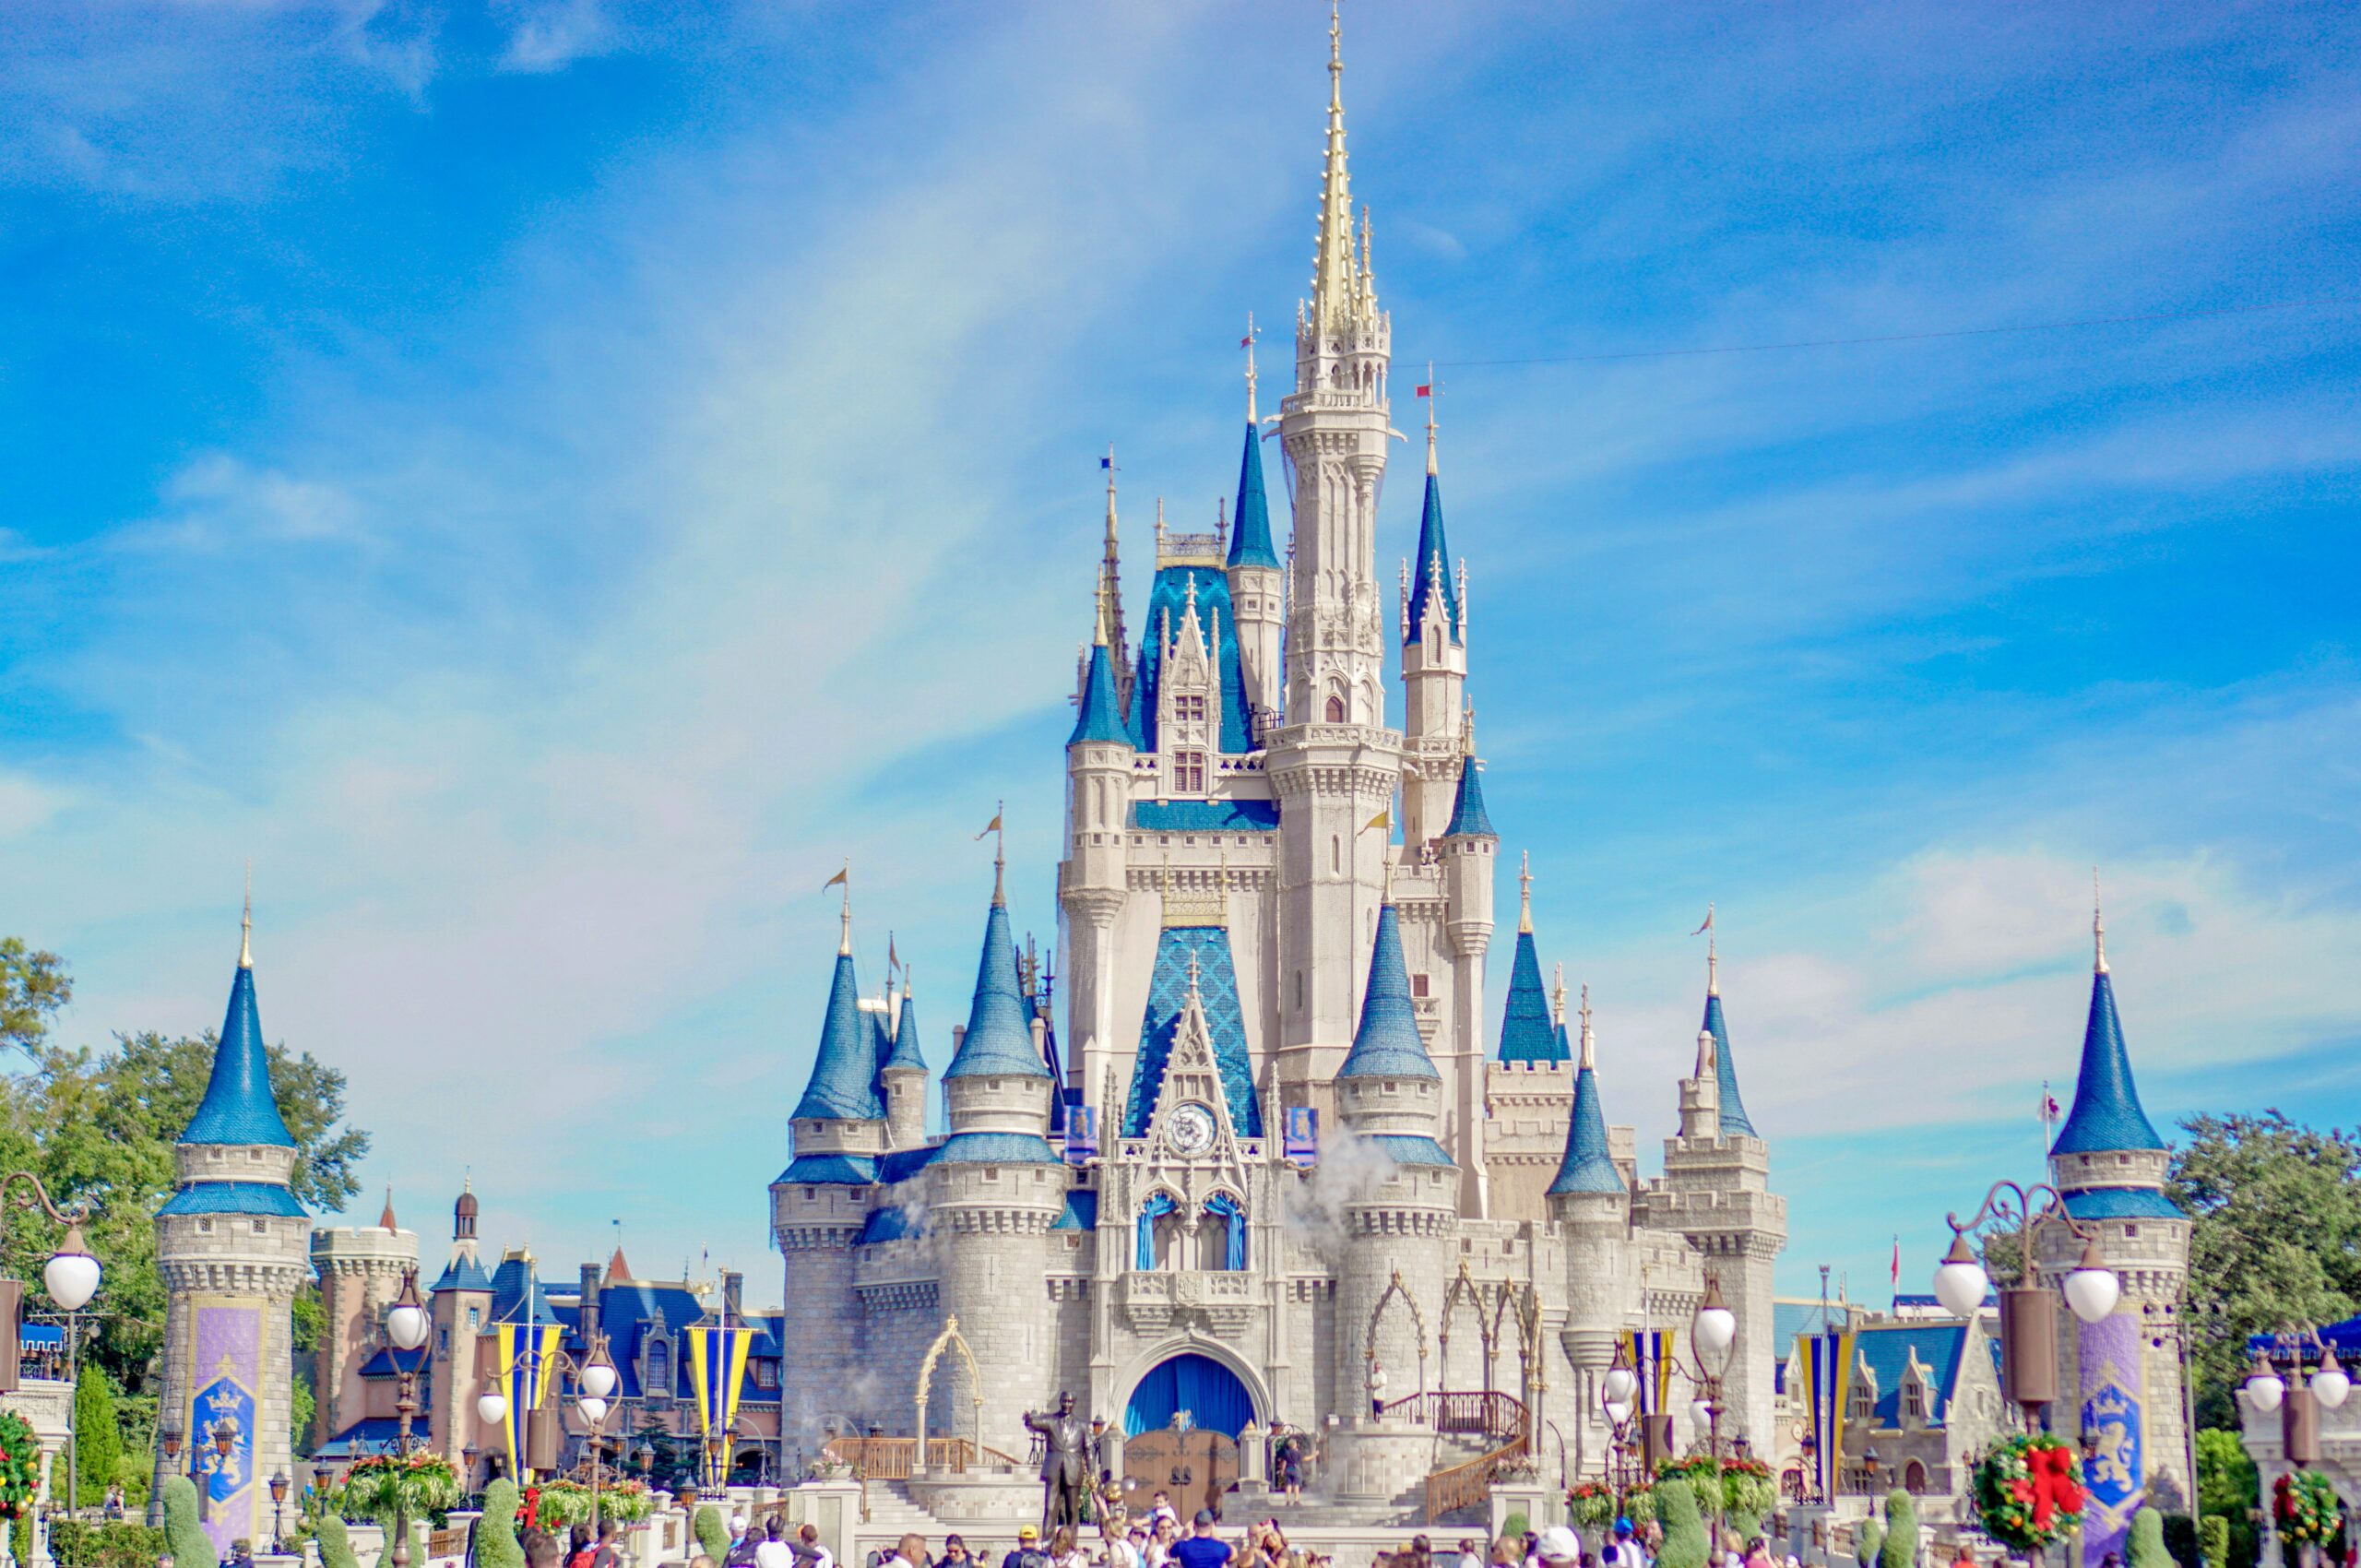 Orlando is one of the best places to live in Florida for those wanting to be close to theme parks. Pictured: Cinderella's castle at Magic Kingdom in Disney World